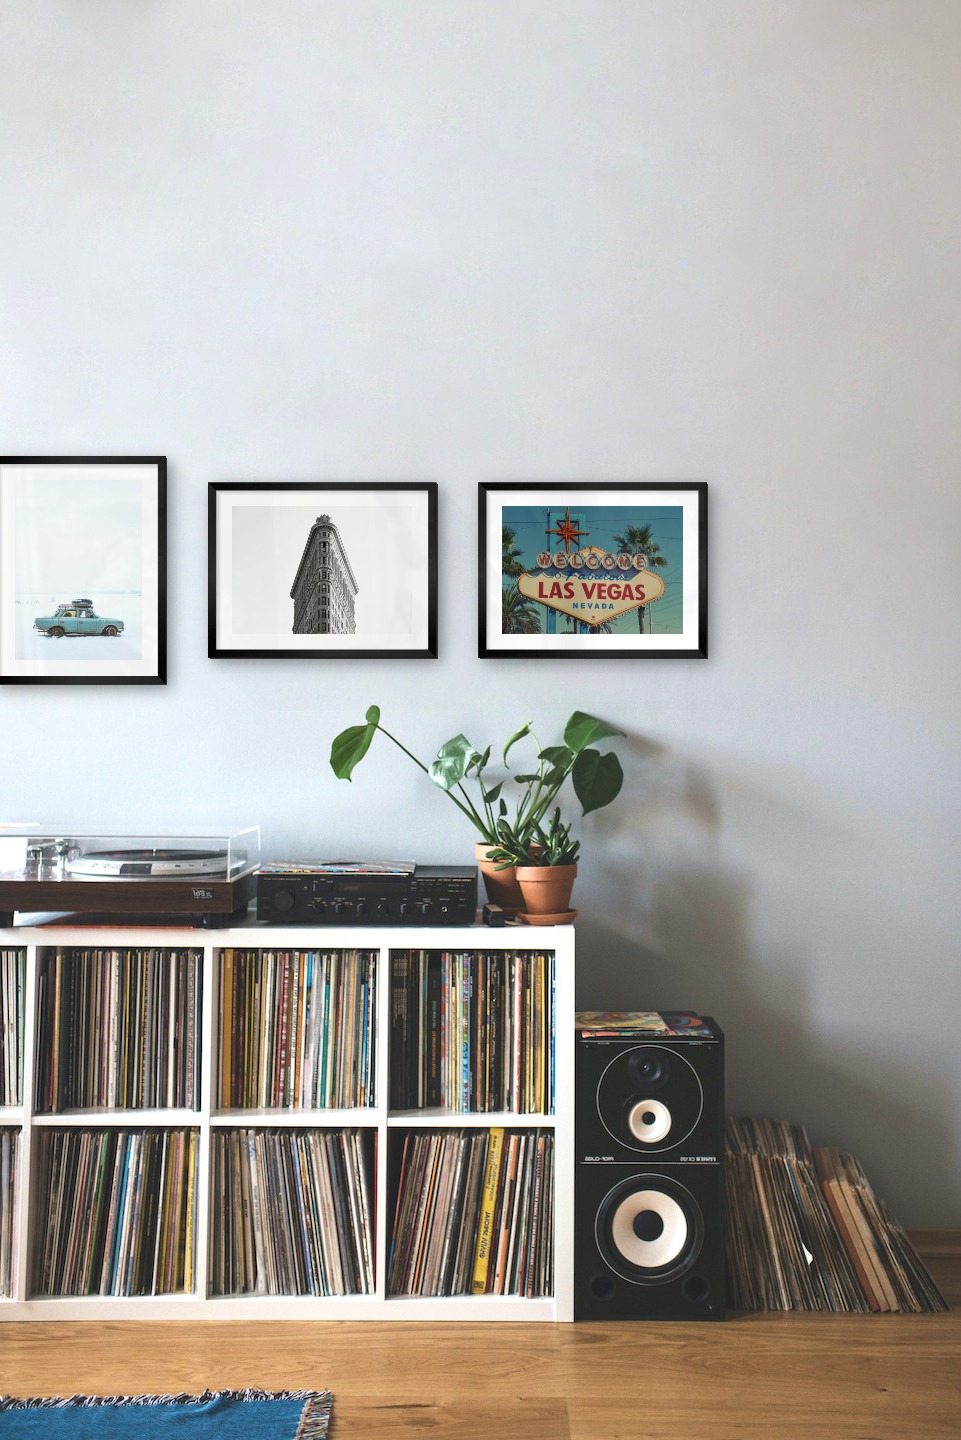 Gallery wall with picture frames in black in sizes 30x40 with prints "Guitar", "Car in snow", "Triangular building" and "Las Vegas sign"